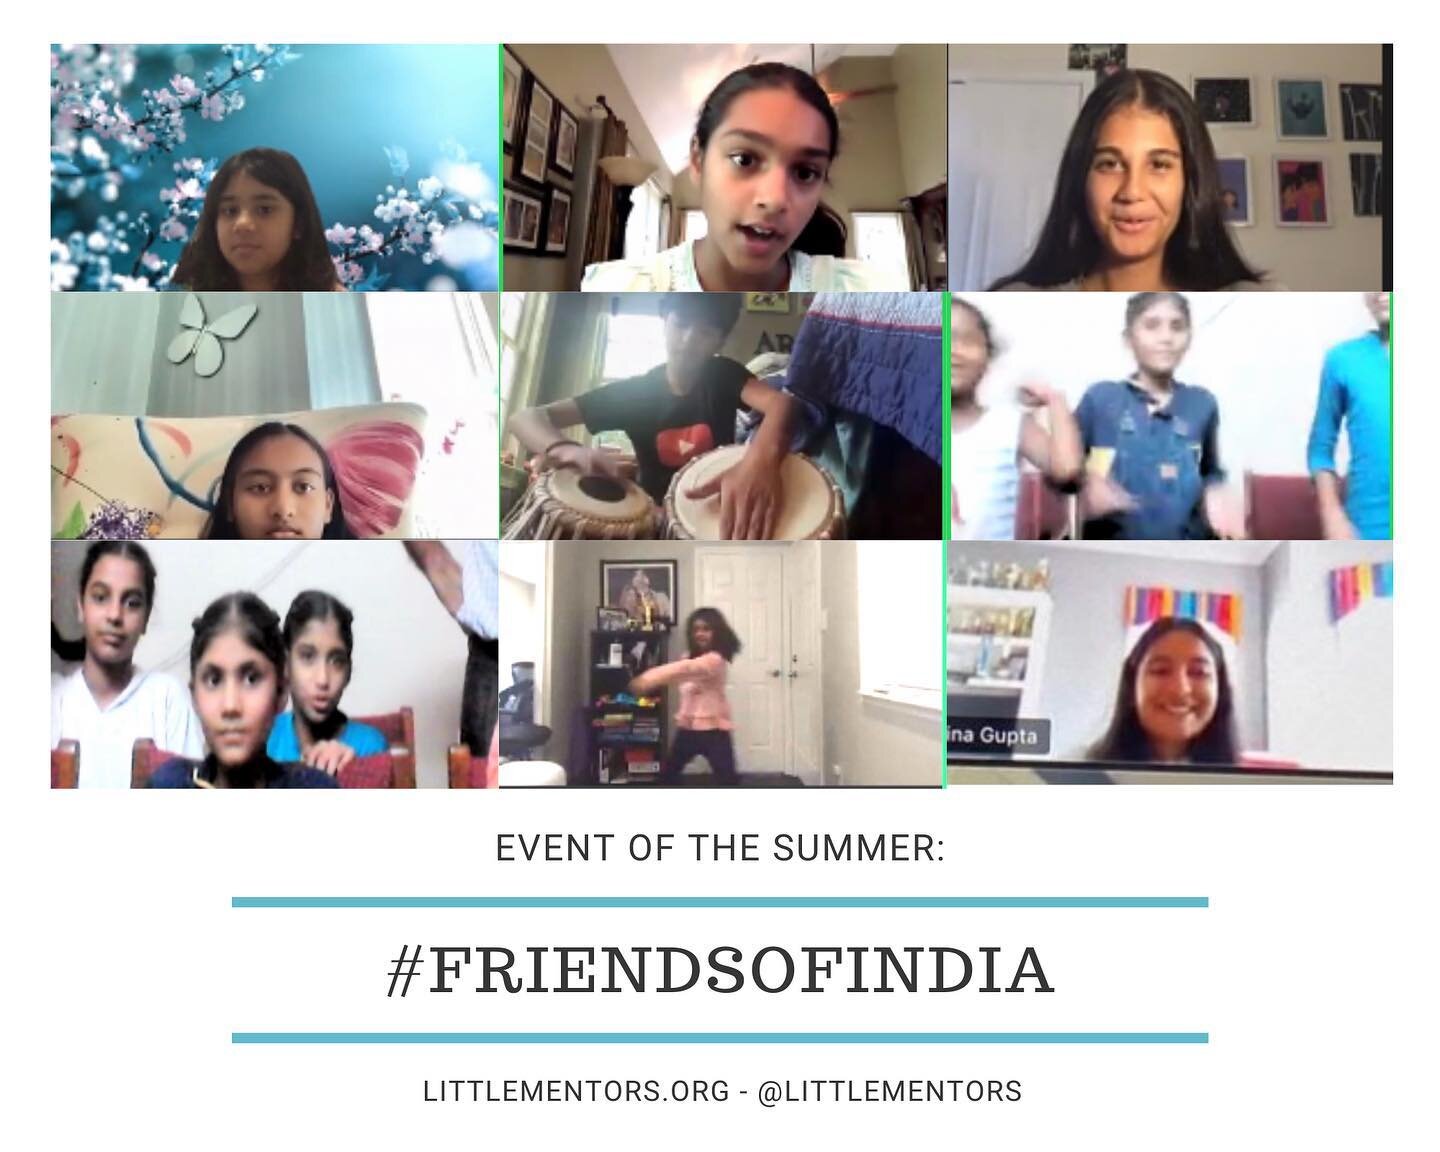 What a great kickoff event for this year! Thanks to everyone who attended this Little Mentors call with our friends in India. We were able to celebrate India&rsquo;s Independence Day with dances, songs, and other activities. Stay tuned for more from 